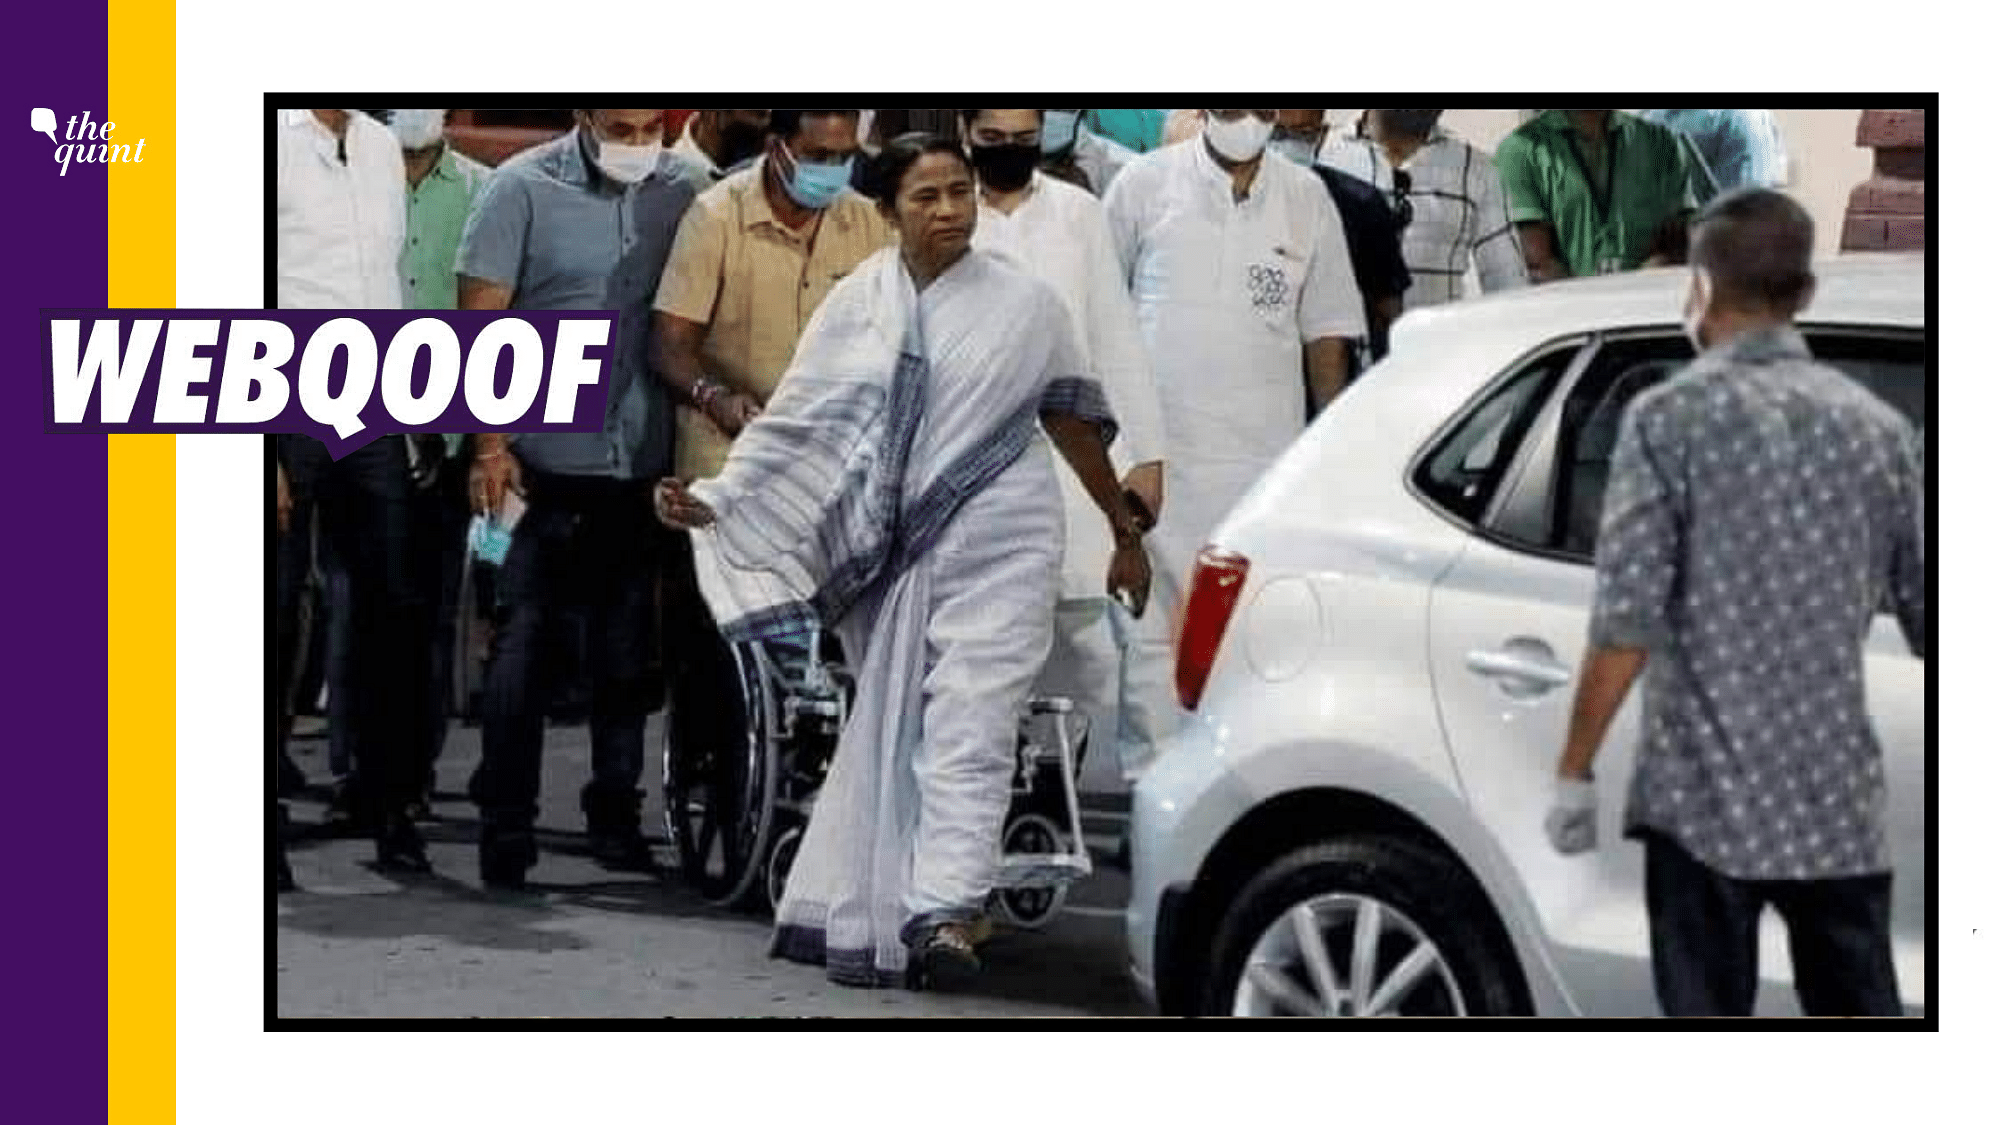 Some social media users shared a photoshopped image to claim CM Banerjee is doing ‘drama’ ahead of the West Bengal polls.